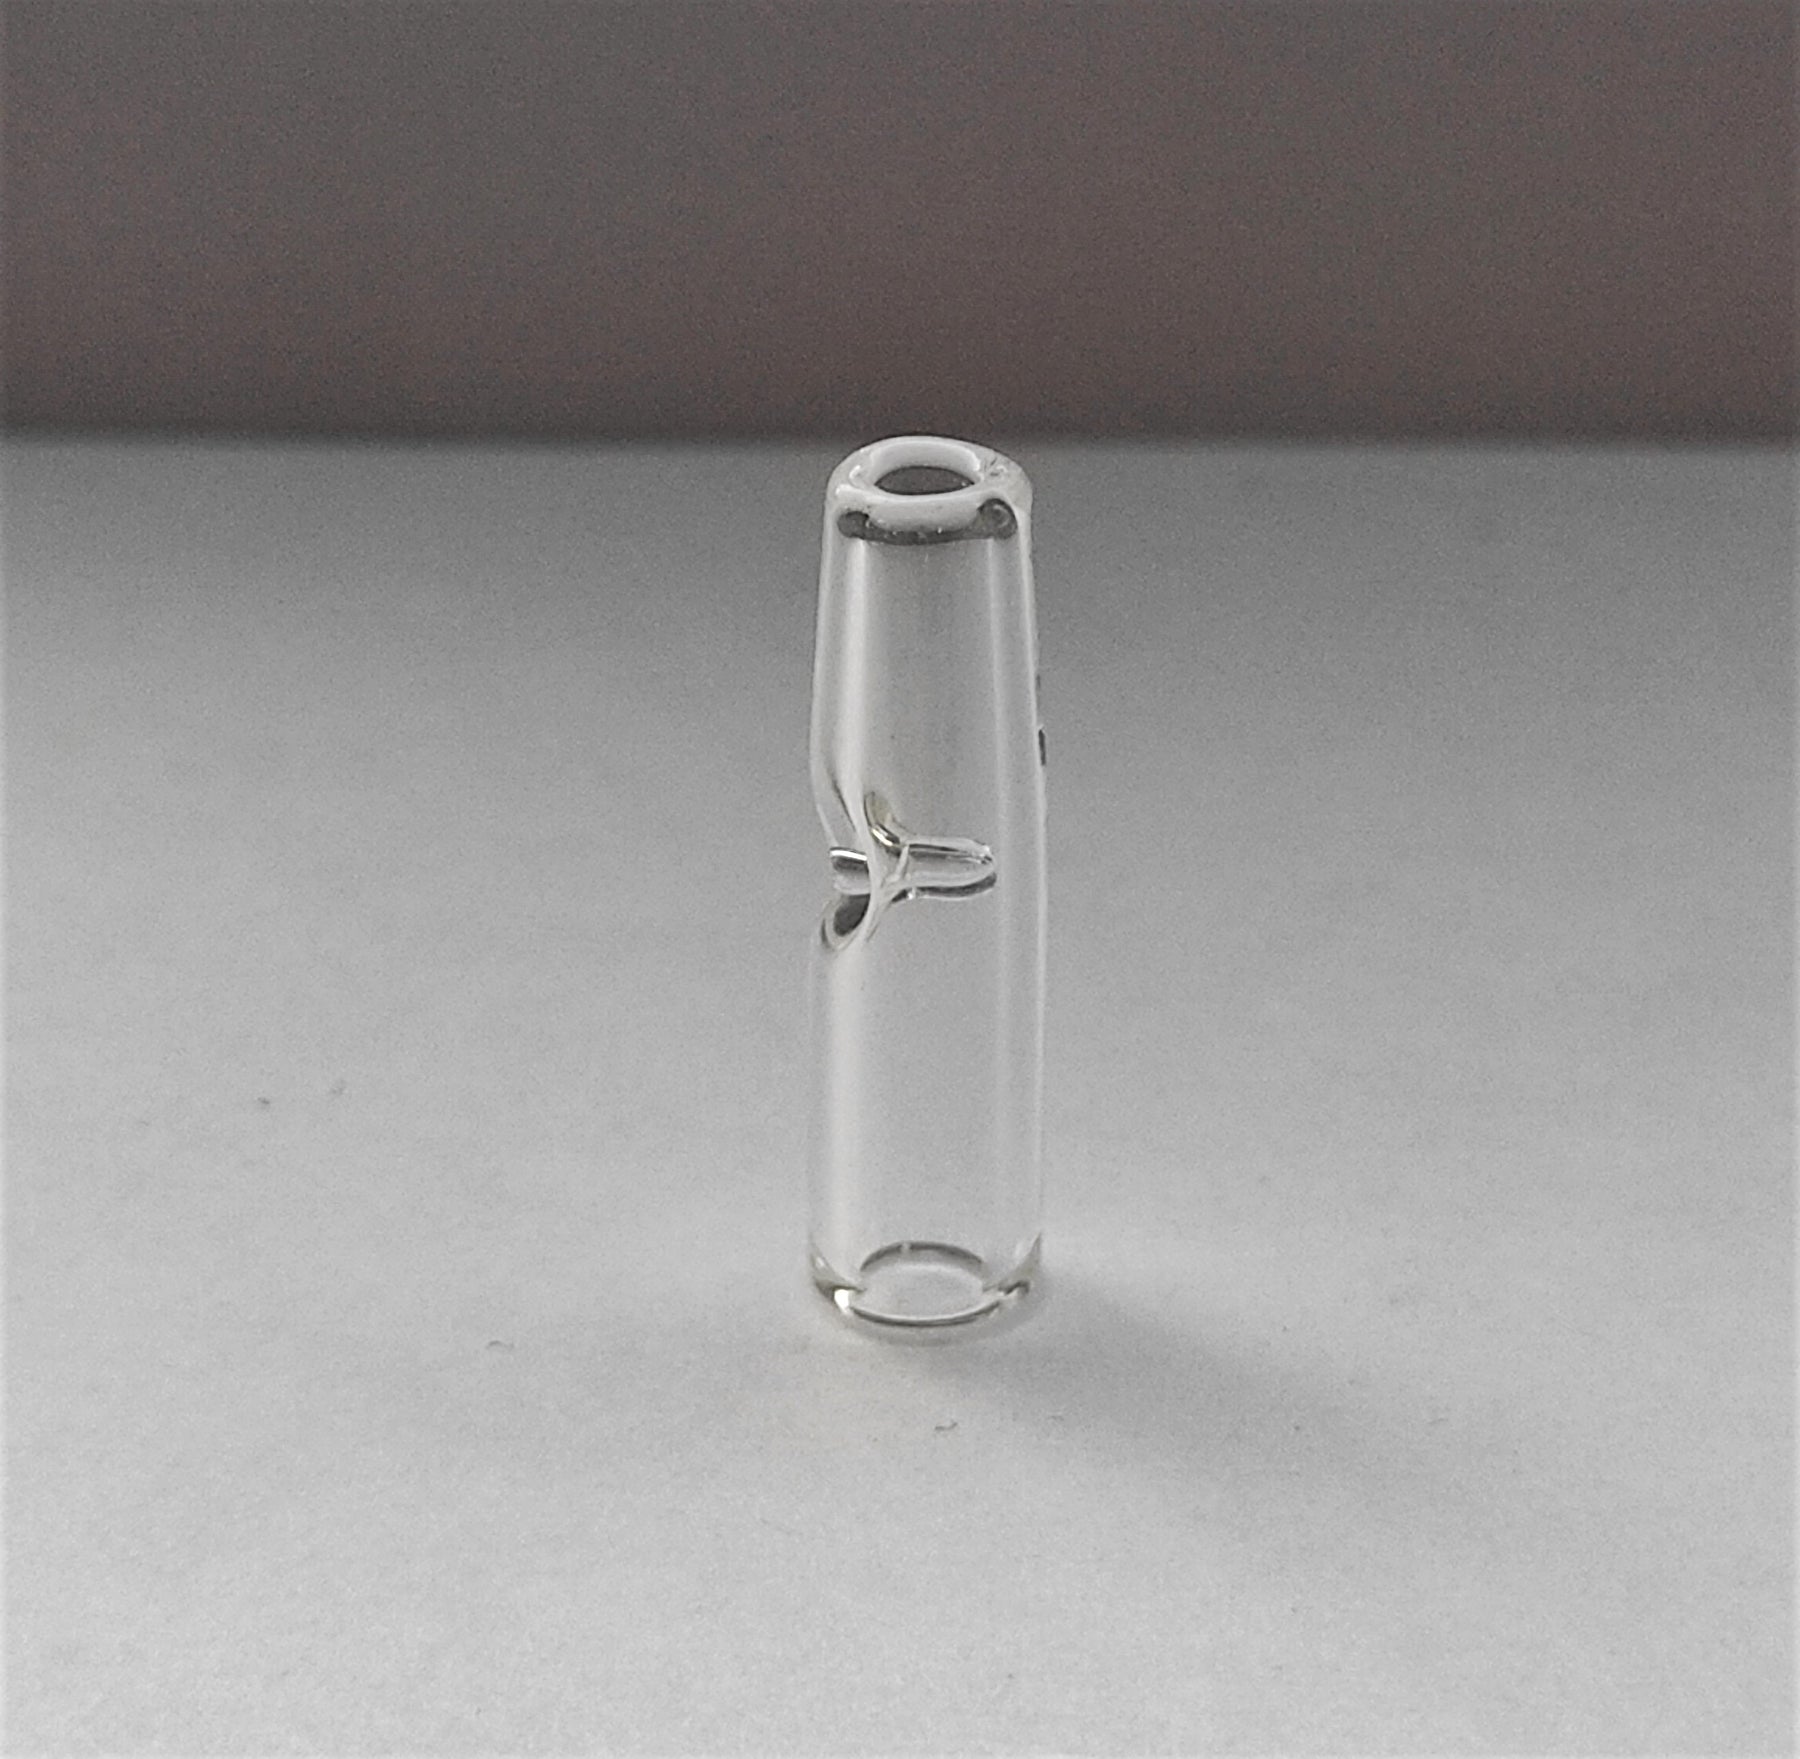 OutonTrip Re-useable Small Glass Filter Tip - Round Mouthpiece - 26mm